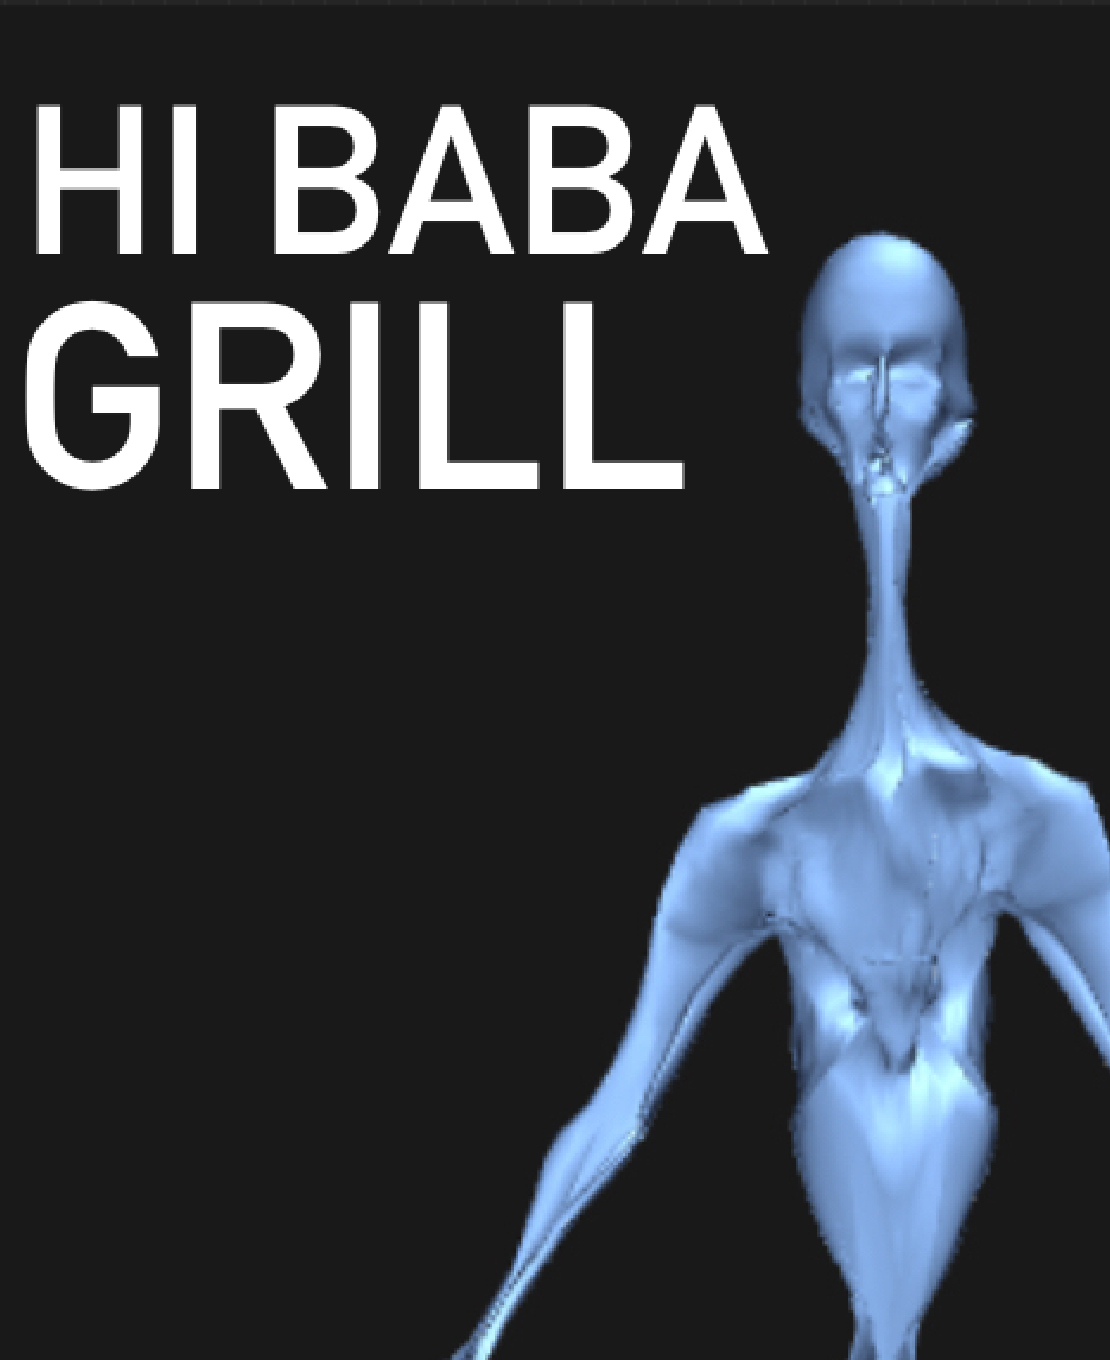 baba grill ;) - Roblox